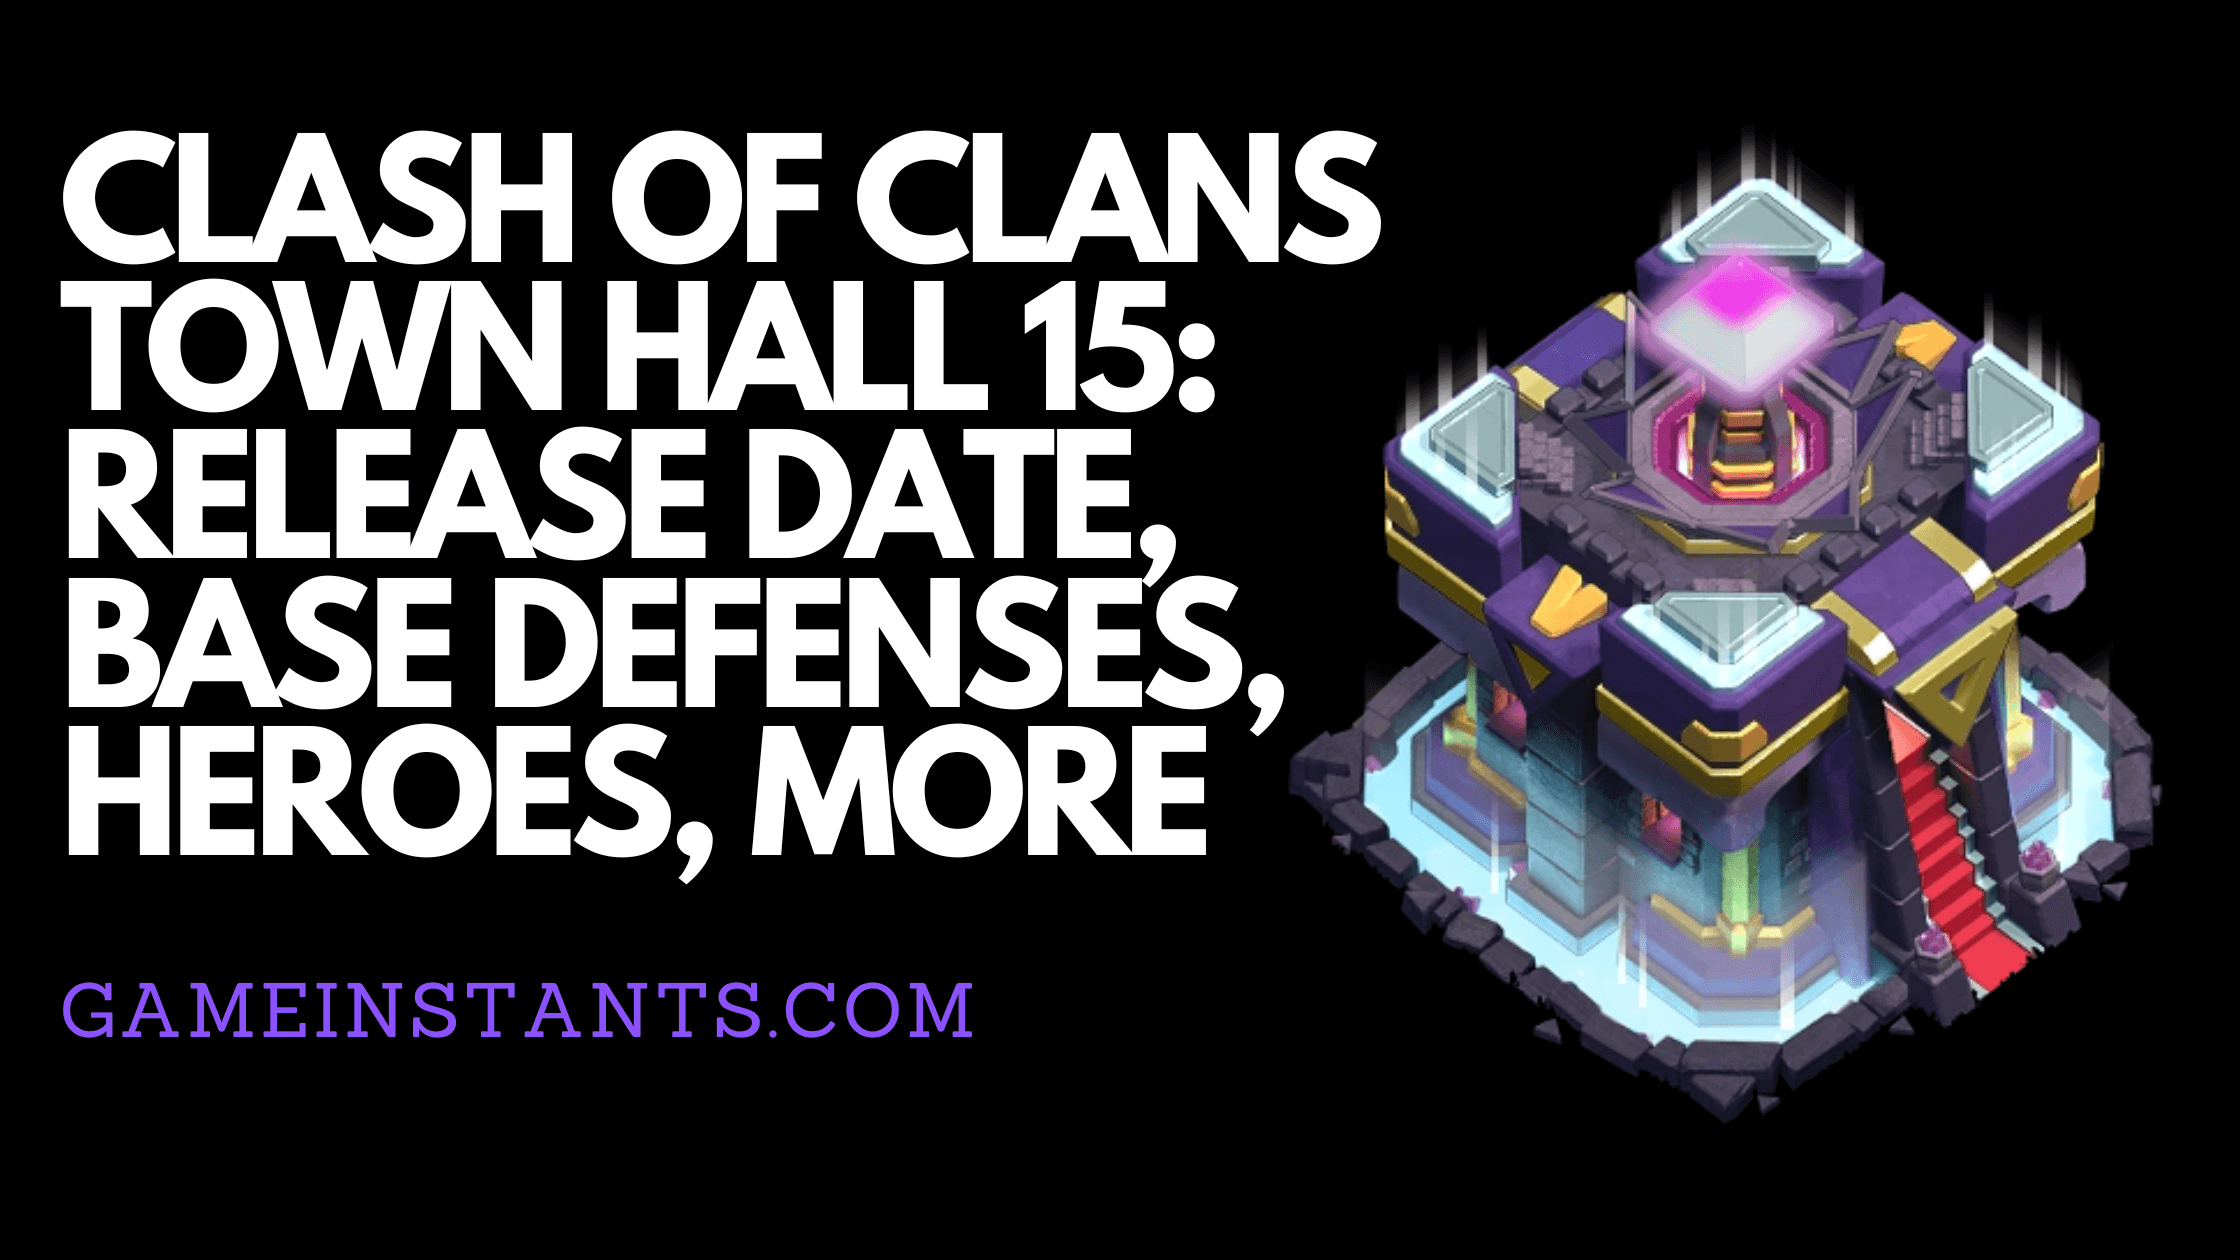 Clash Of Clans Town Hall 15: Release Date, Base Defenses, Heroes, More